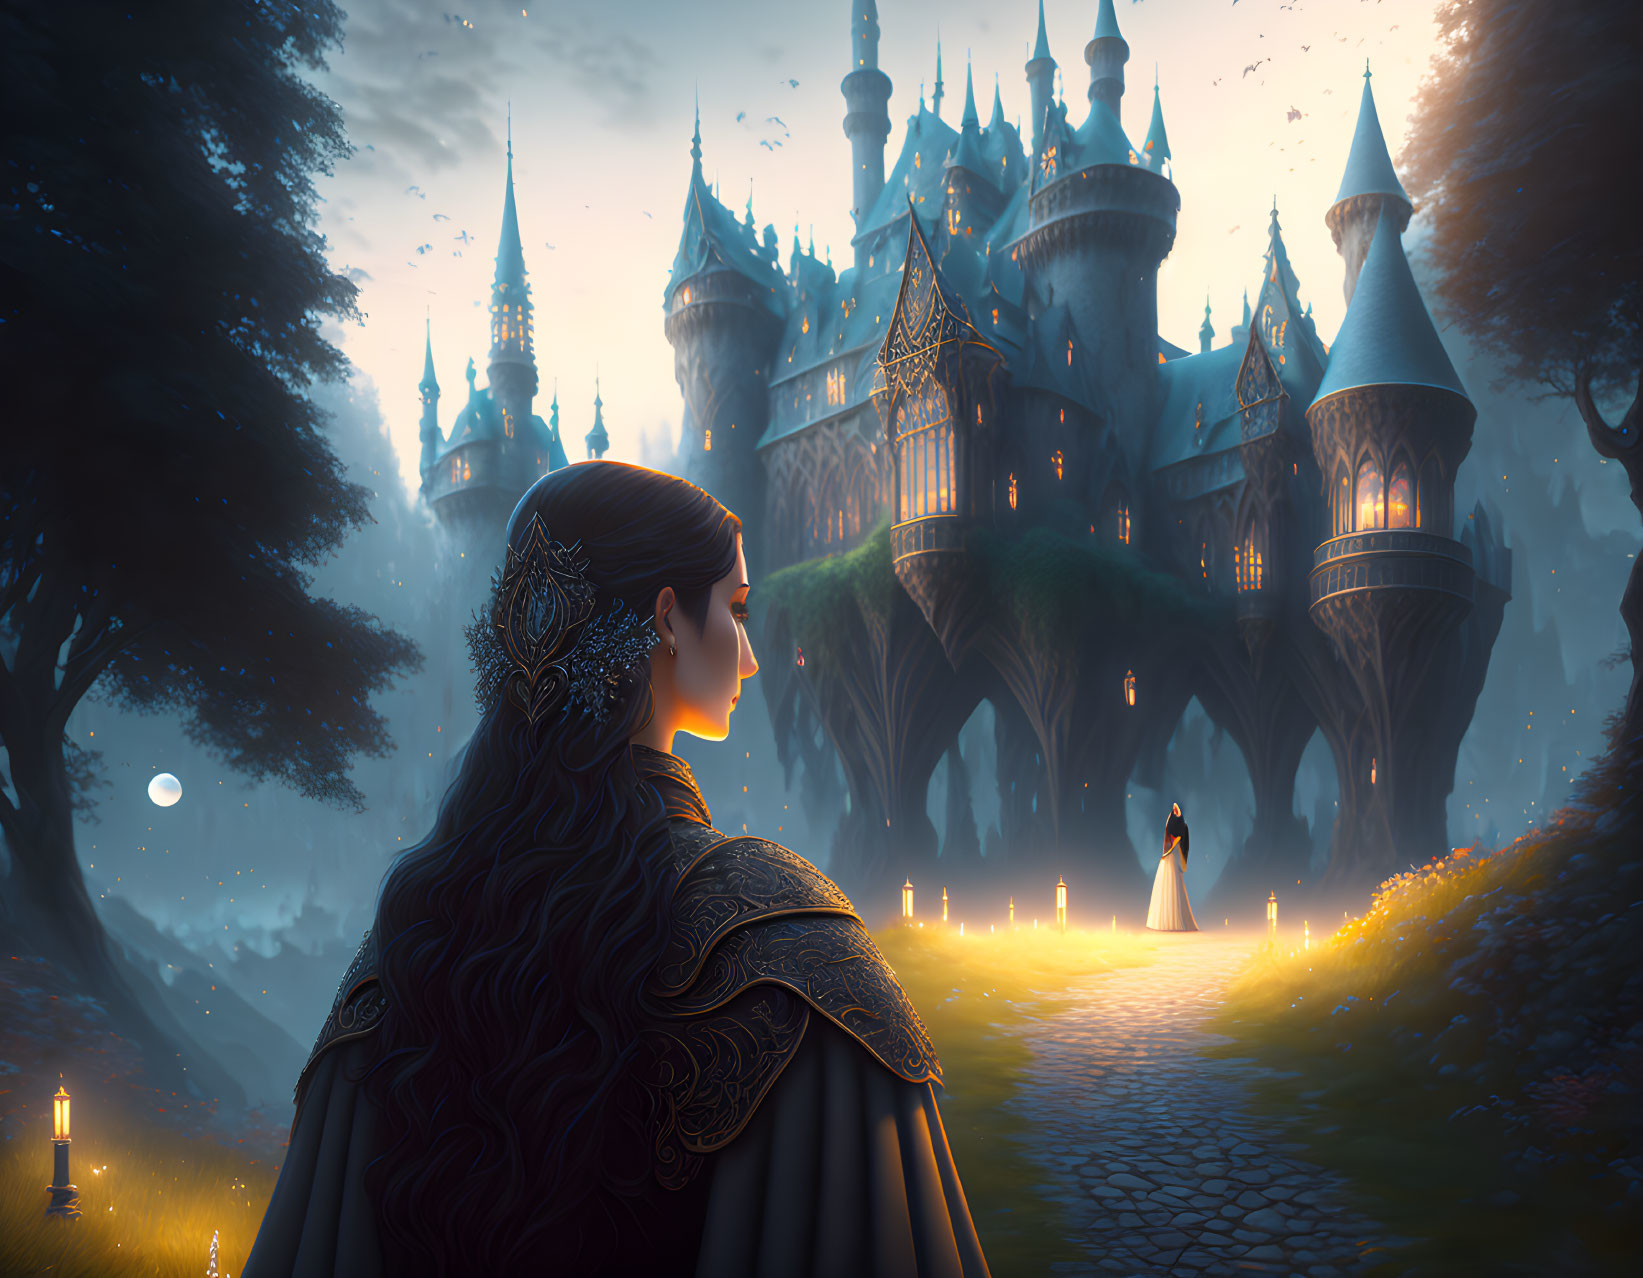 Woman admiring castle in enchanted forest at twilight with figure on candle-lit path